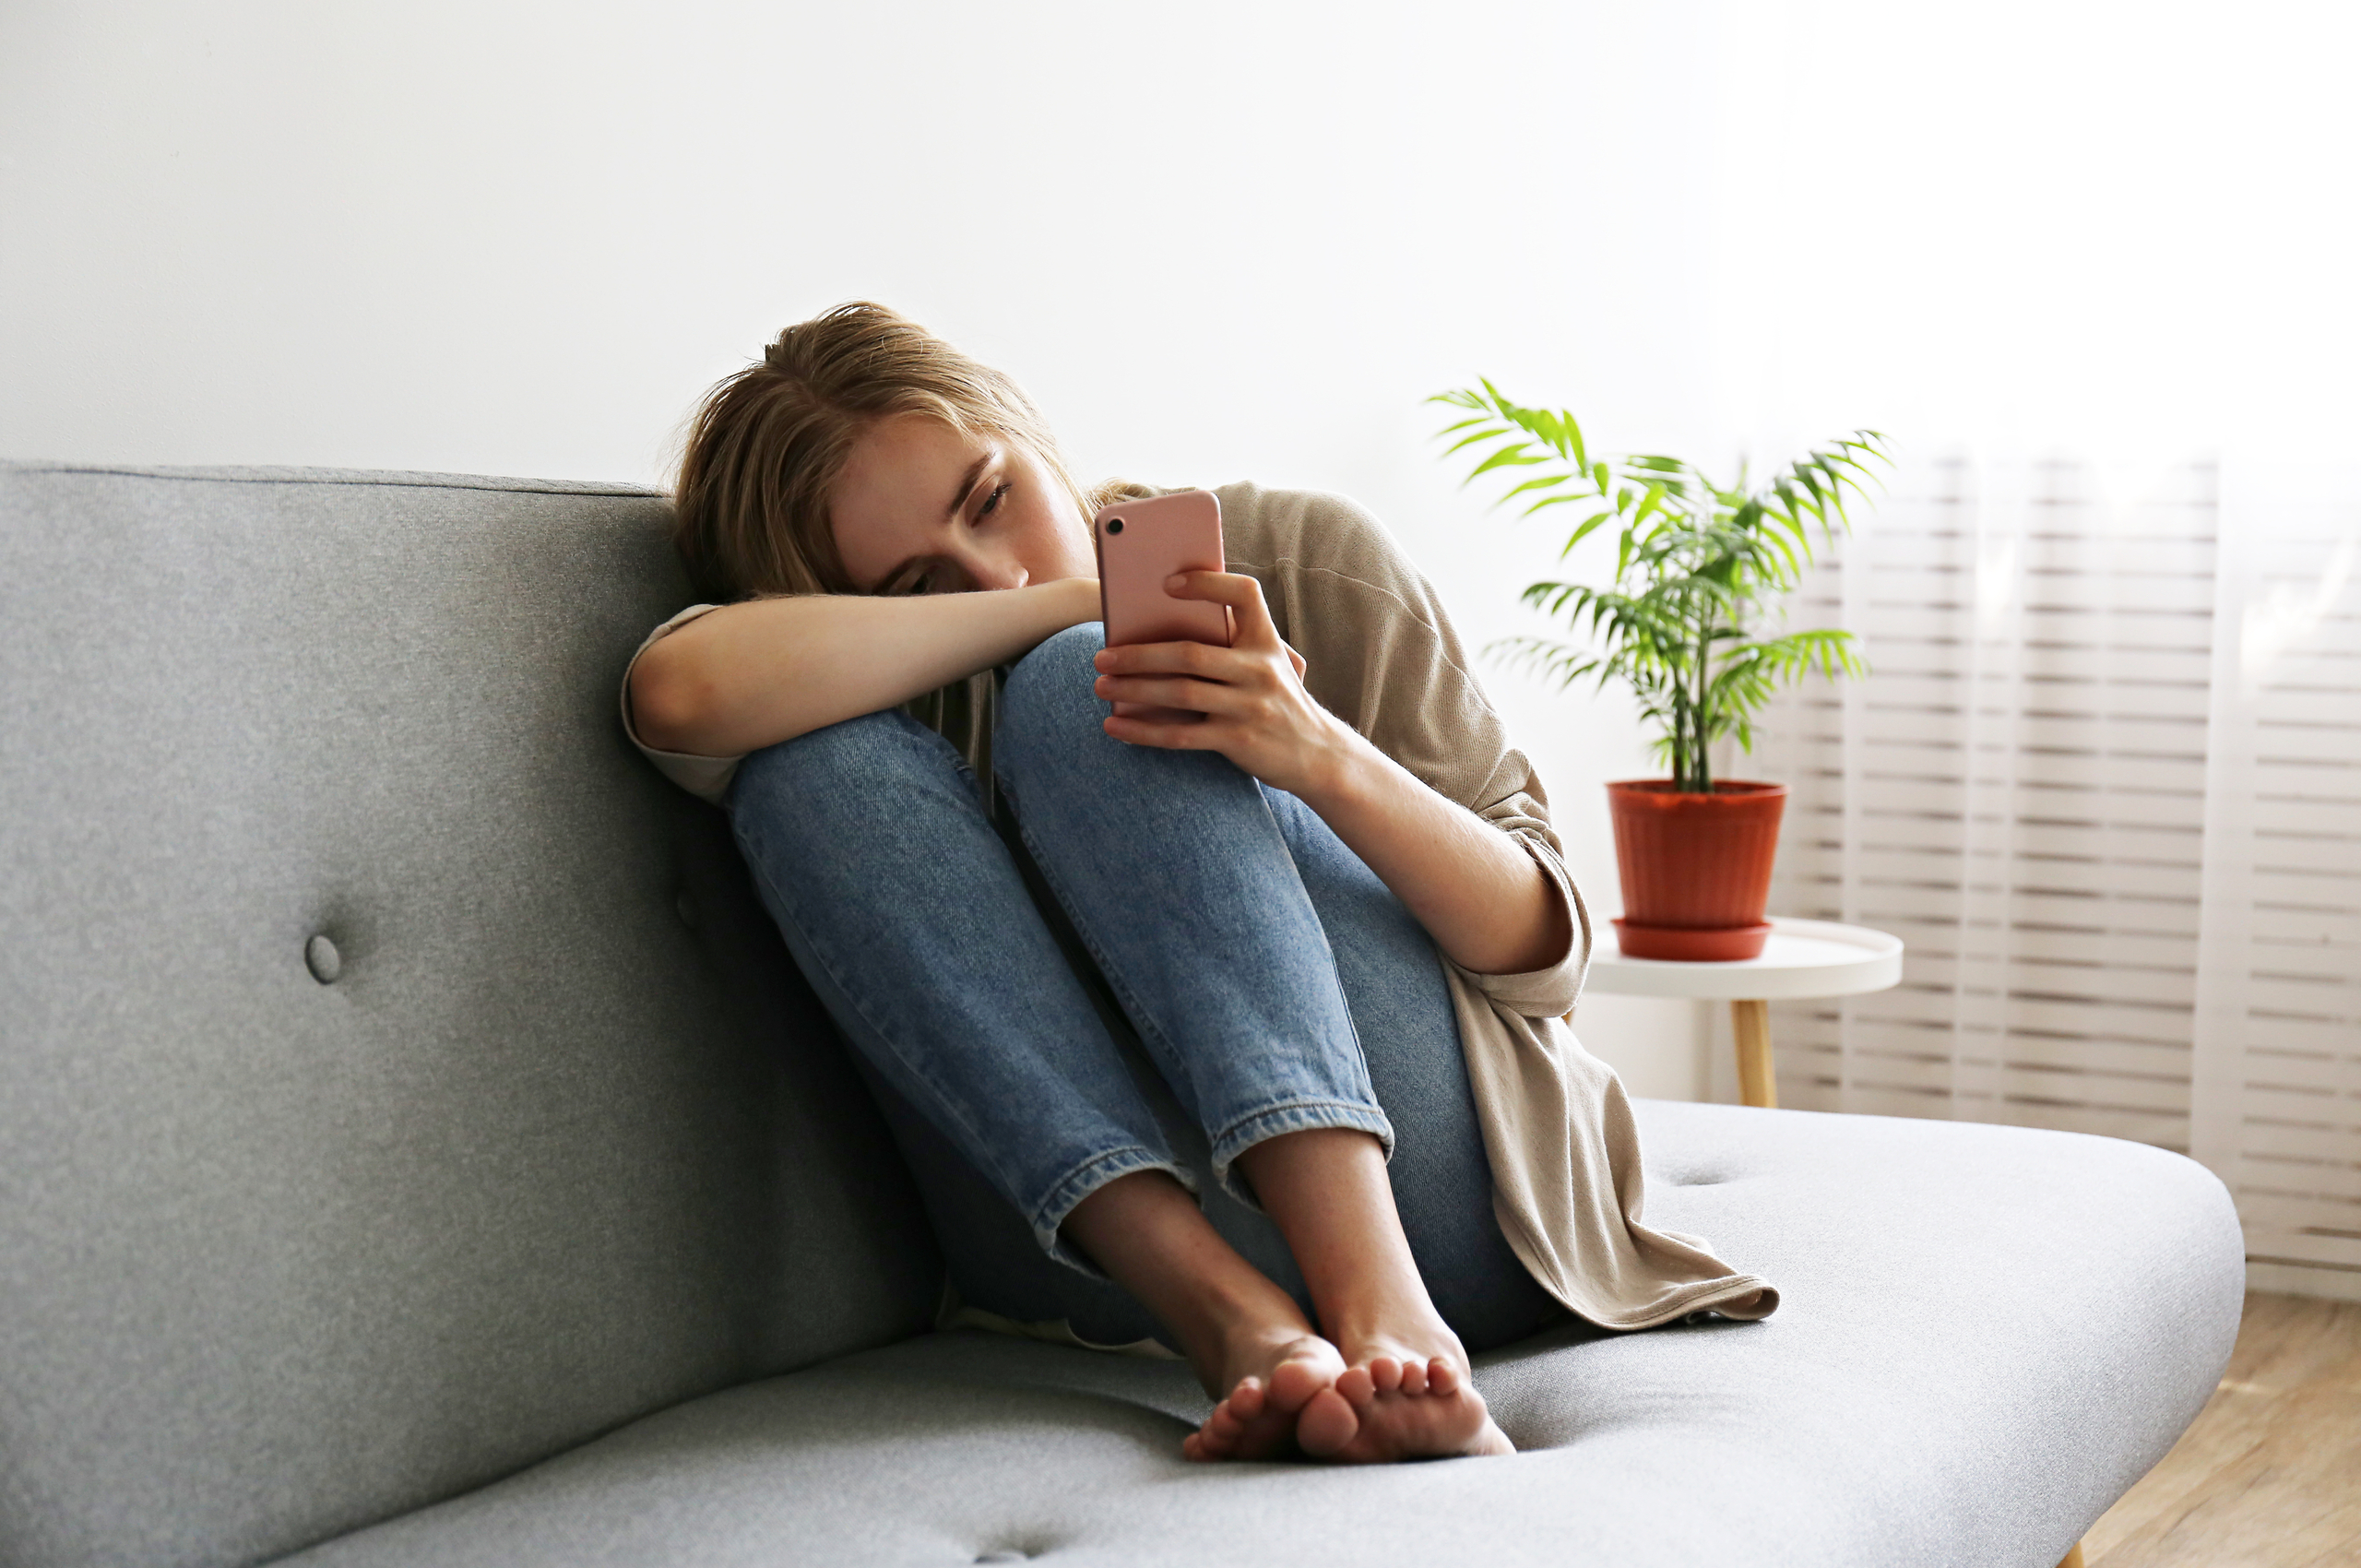 young woman looking sad while looking at her phone